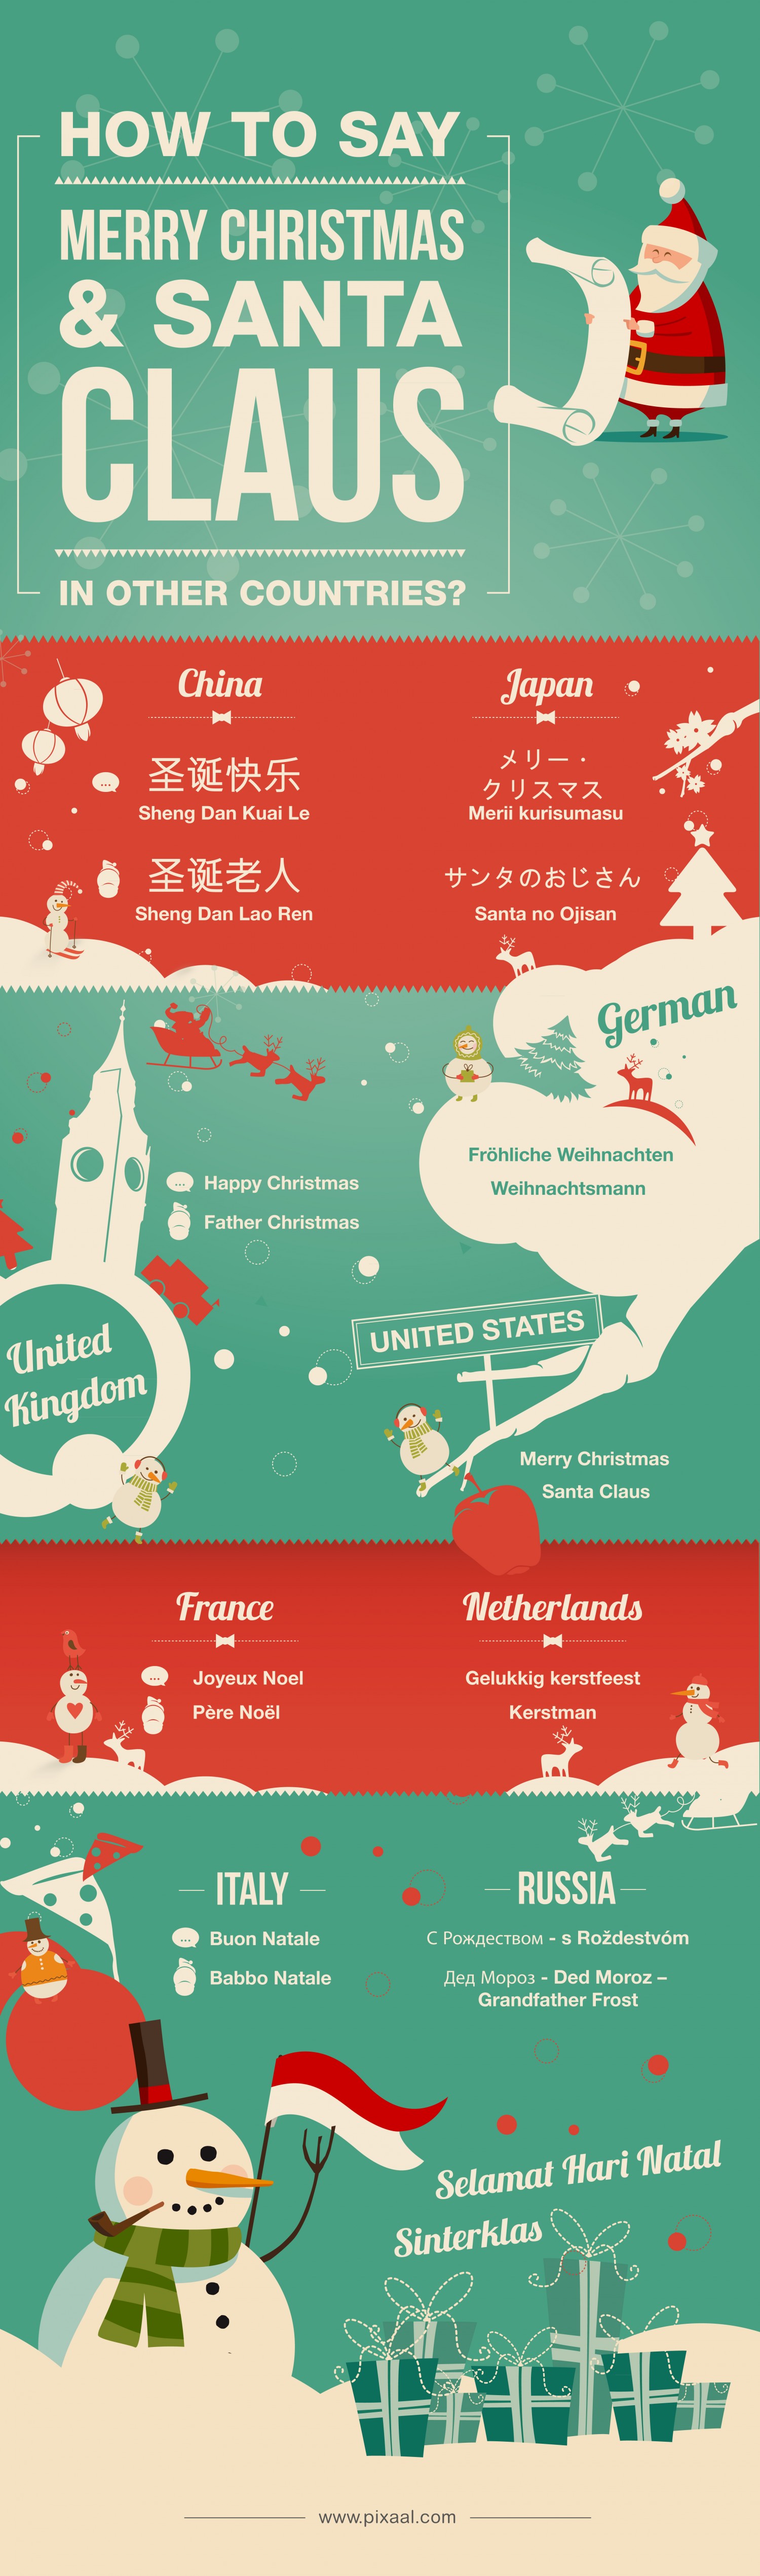 How to Say Merry Christmas and Santa Claus in Other Languages